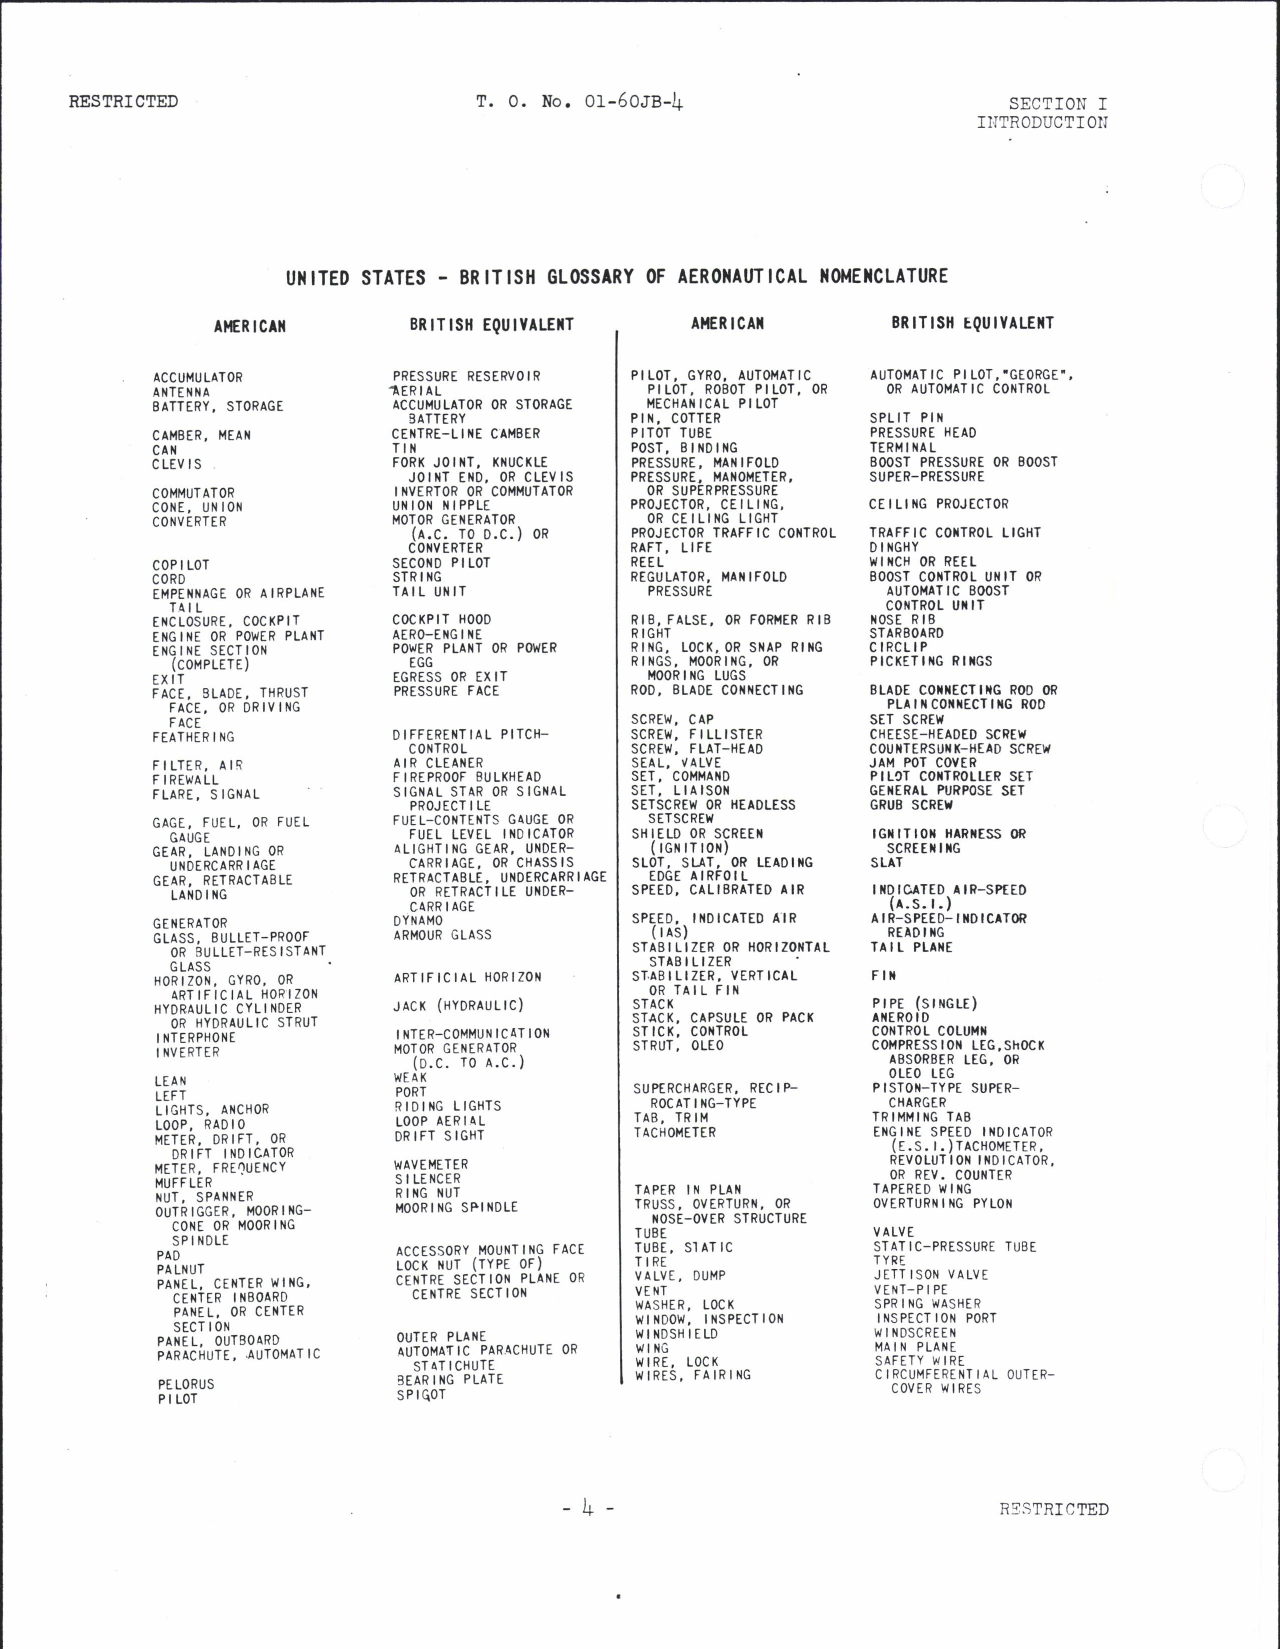 Sample page 8 from AirCorps Library document: Parts Catalog for P-51 Airplane